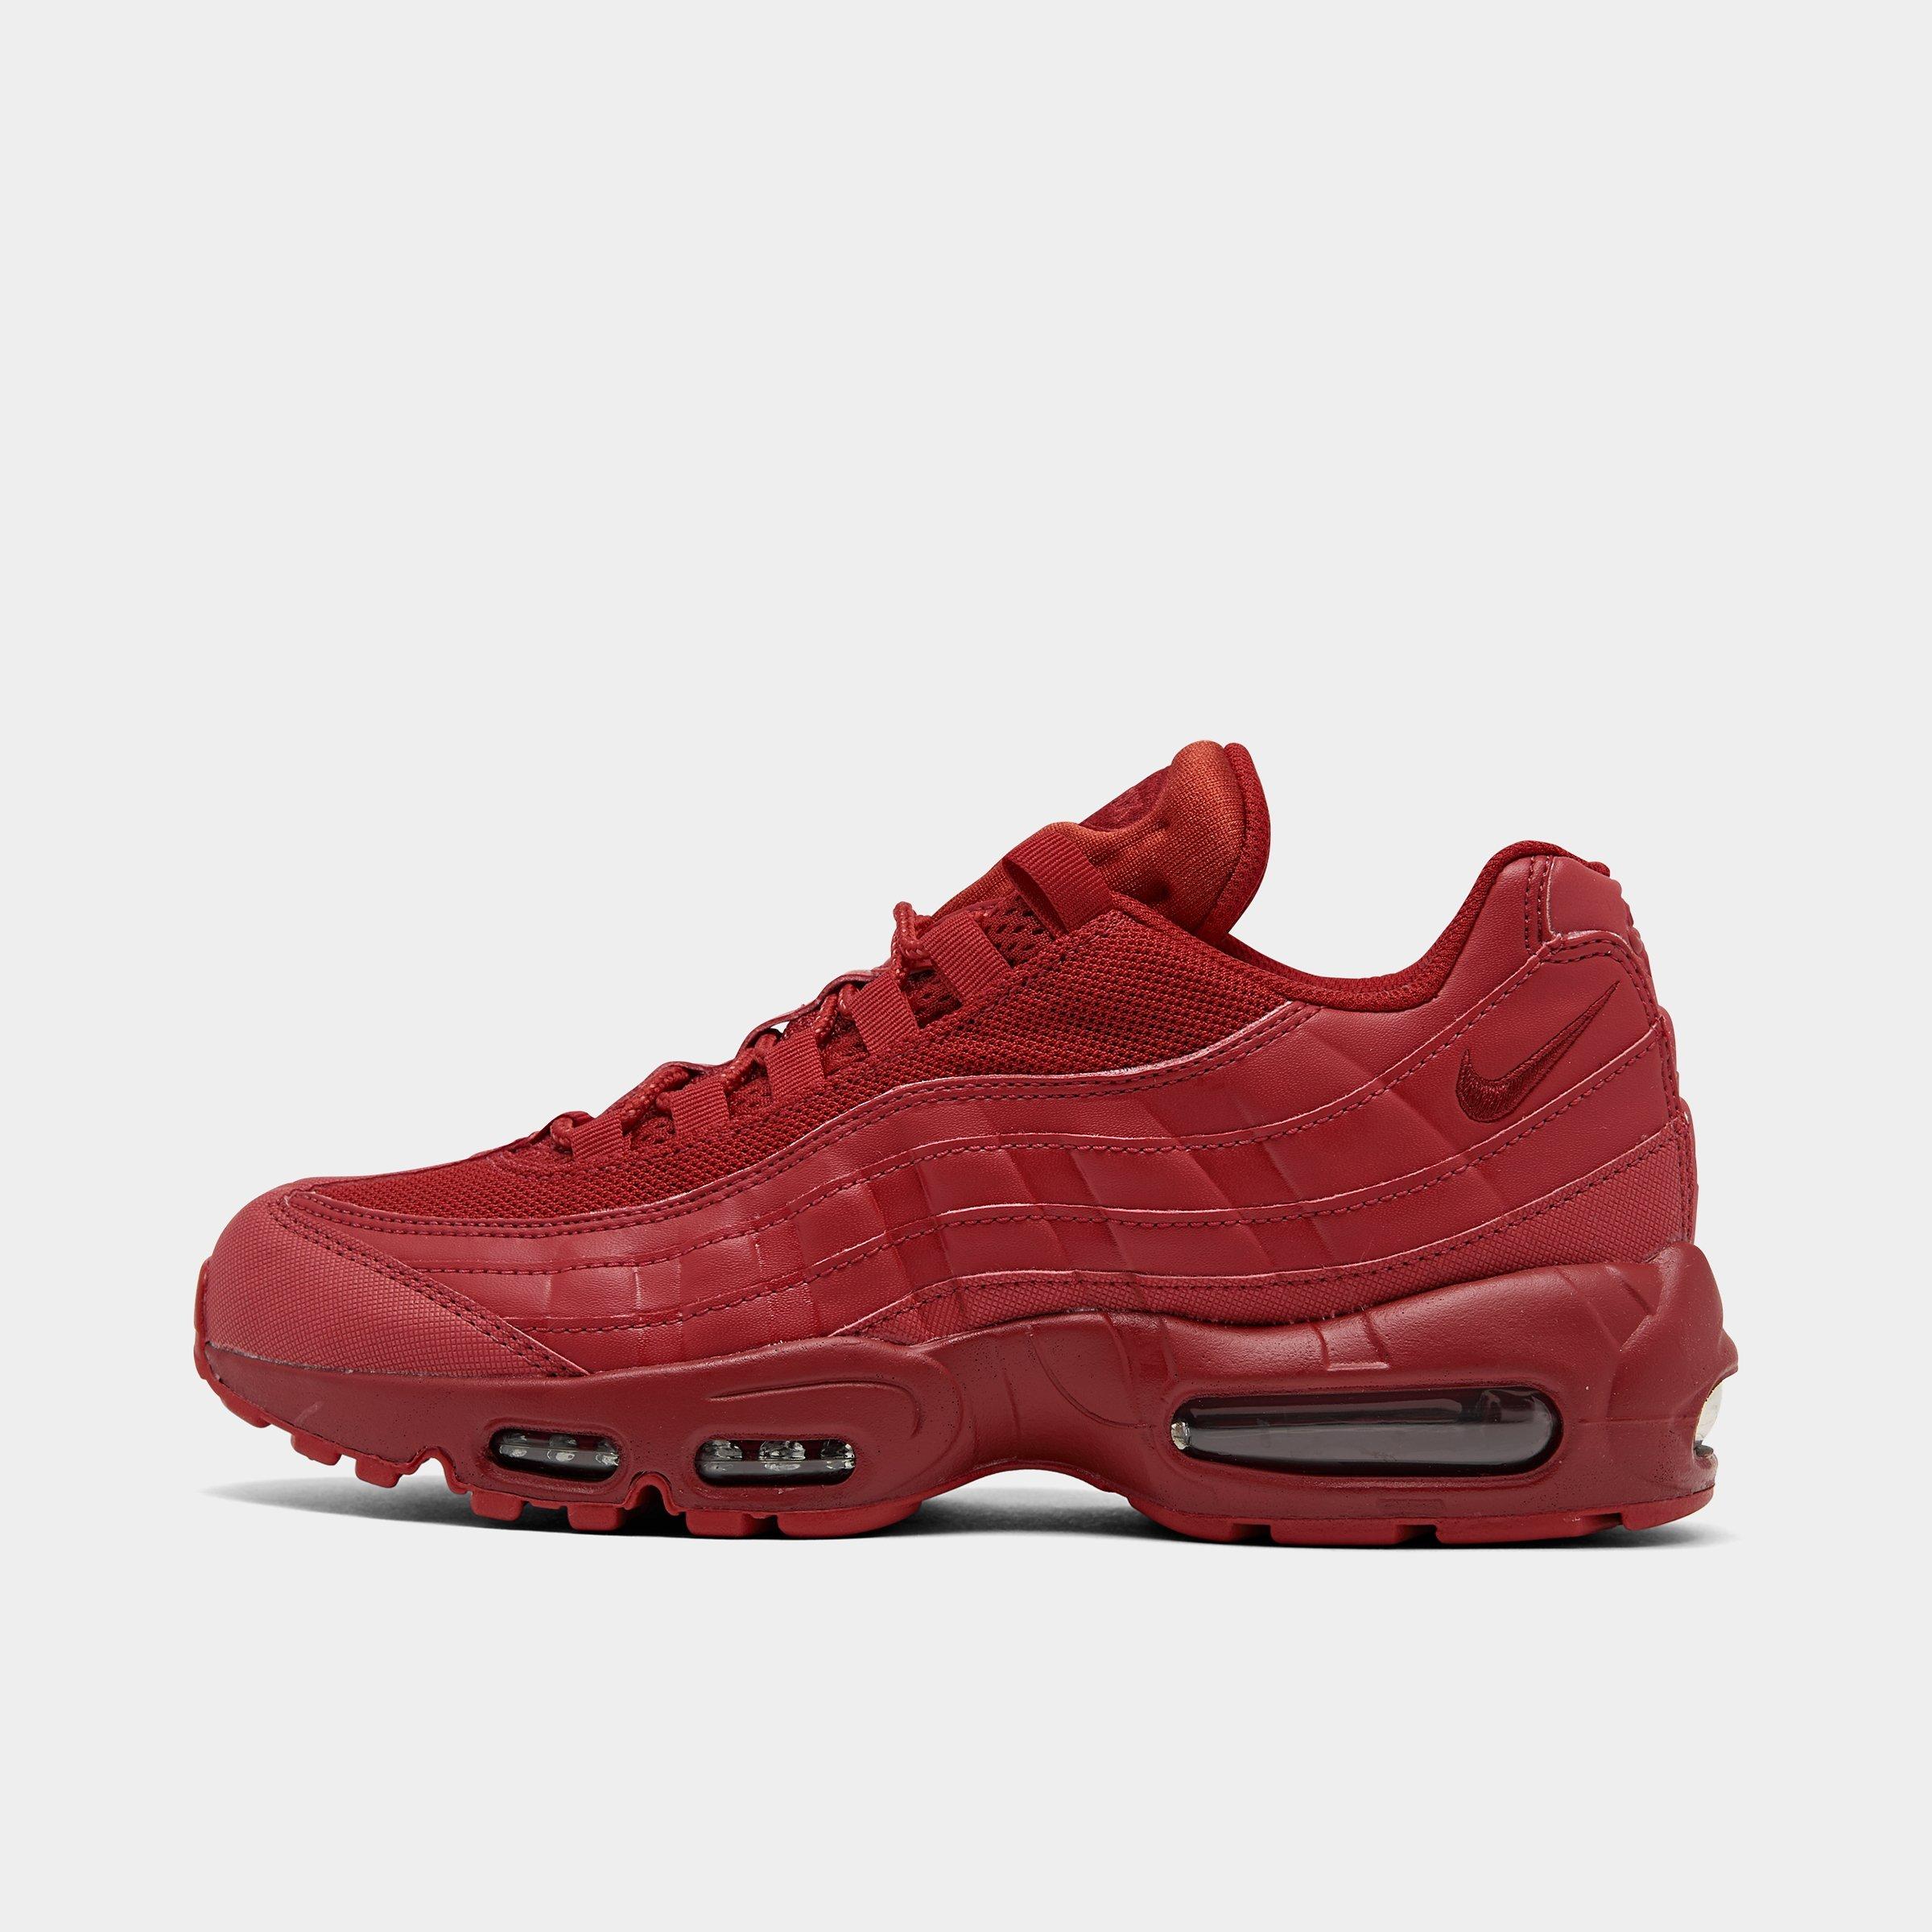 all red air max 95s